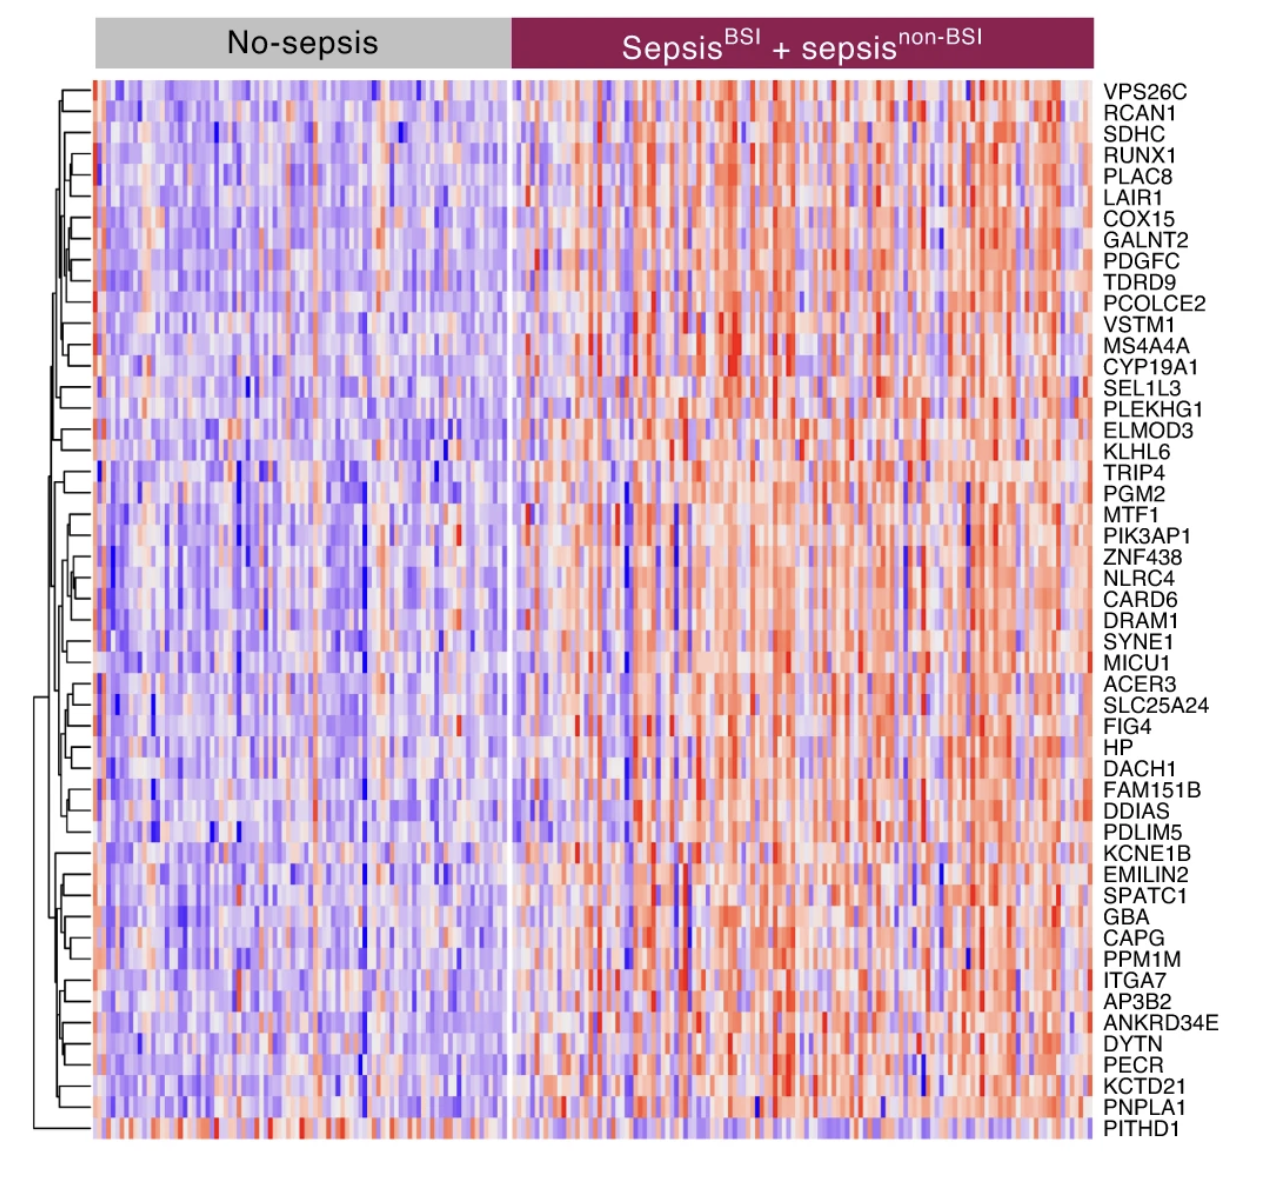 A gene expression heat map diagram. The diagram is roughly square. Two headings at the top denote “No-sepsis” on the left and “SepsisBSI+sepsisnon-BSI” on the right. Down the right vertical axis of the graph, each row is labeled with a different gene name. Down the left vertical axis, lines denote relationships between genes. Each column denotes a different participant sample. Samples in the “No-sepsis” left section are generally in blue colors, except for the bottom row, labeled as the PITHD1 gene, which is in red and pink colors. Samples in the “Sepsis” right section are generally in red and pink colors, except for a few columns that are in blue colors and the PITHD1 row, also in mostly blue colors.